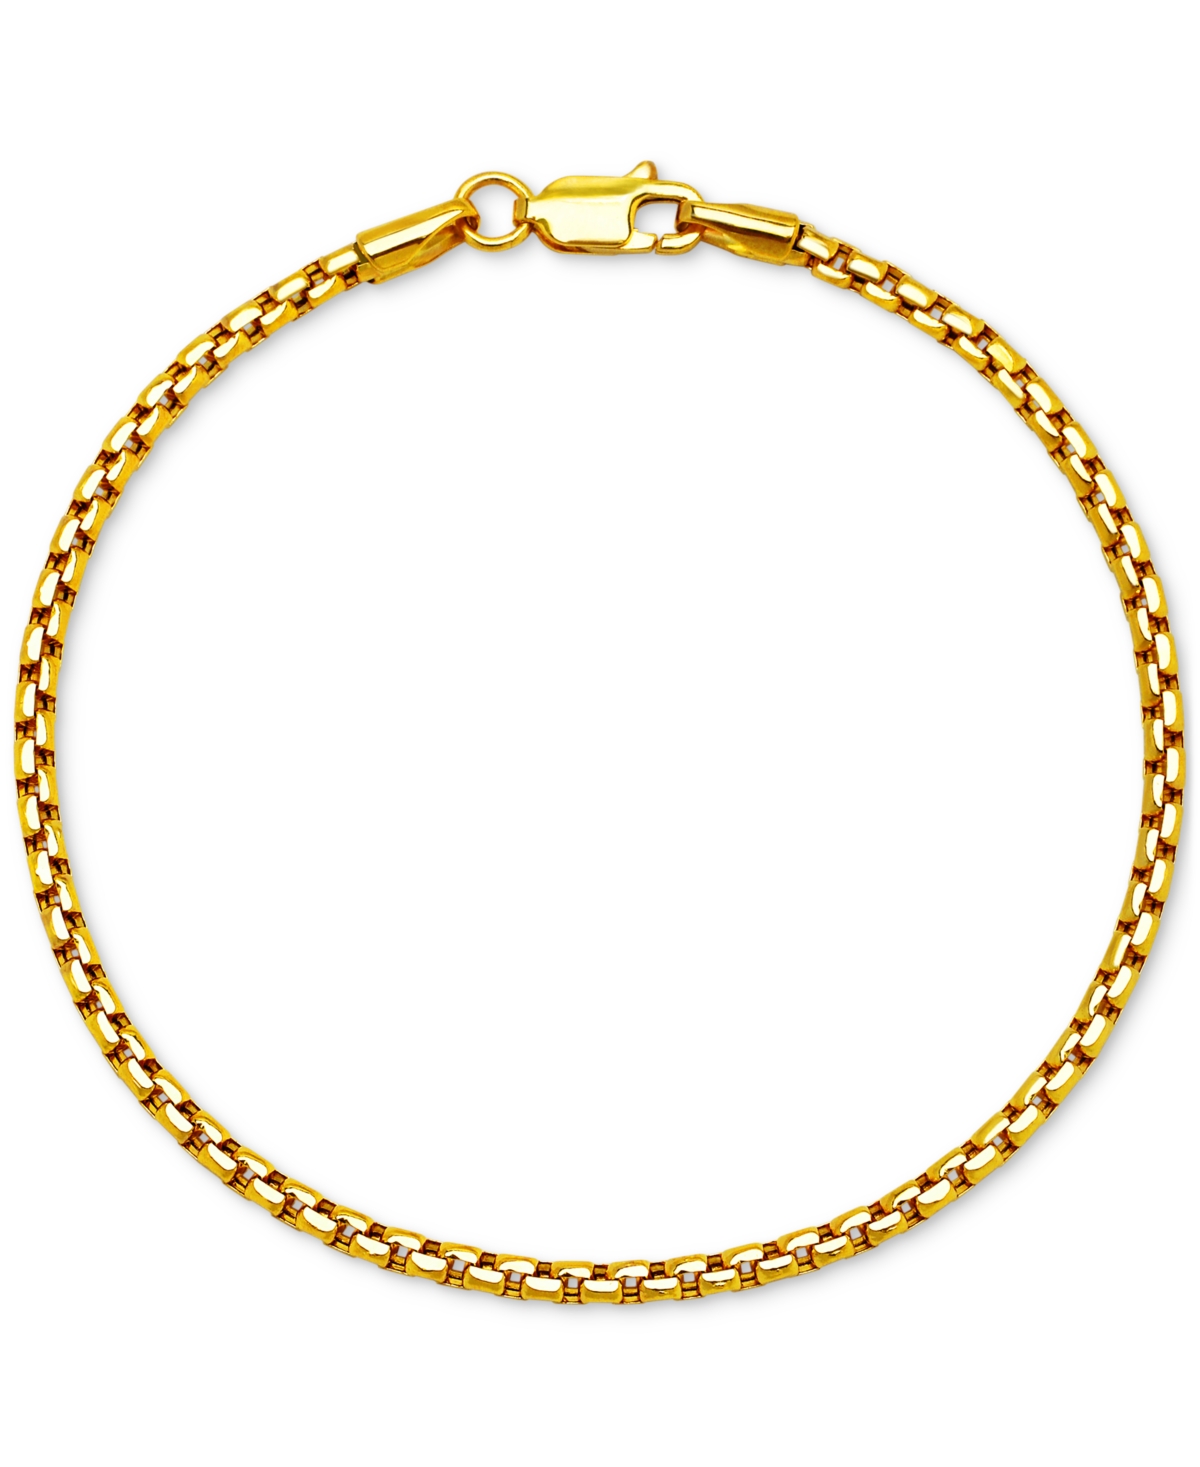 Rounded Box Link Chain Bracelet 7", in 14k Gold - Yellow Gold